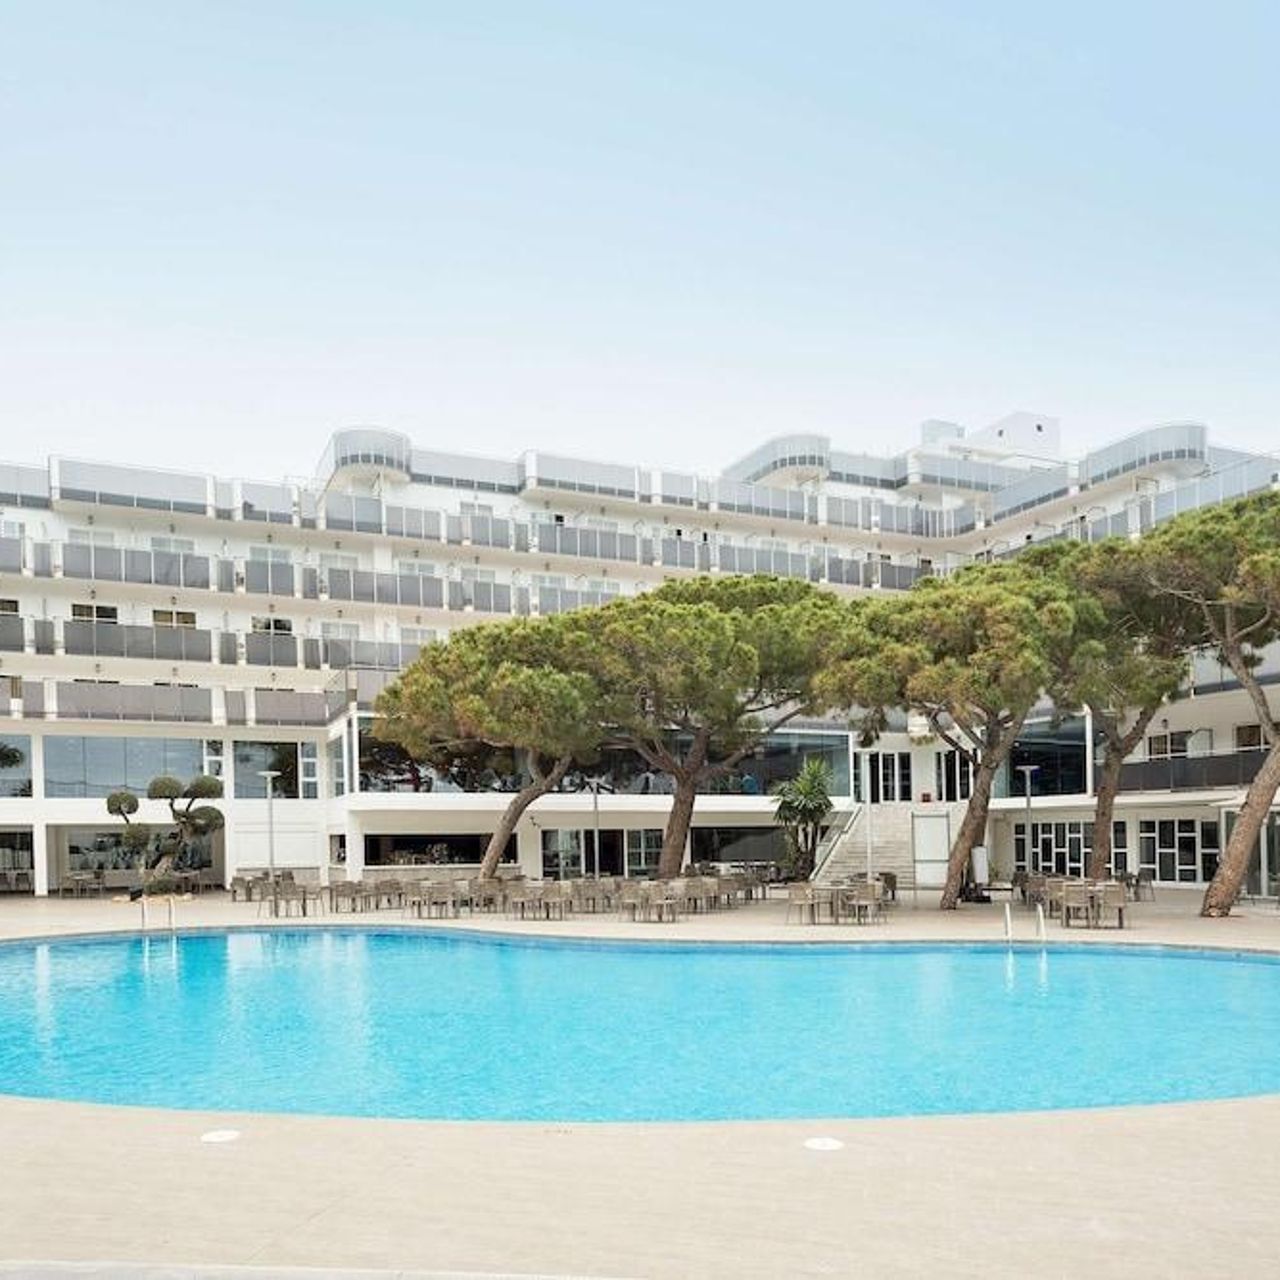 Hotel Best Cap Salou - Great prices at HOTEL INFO